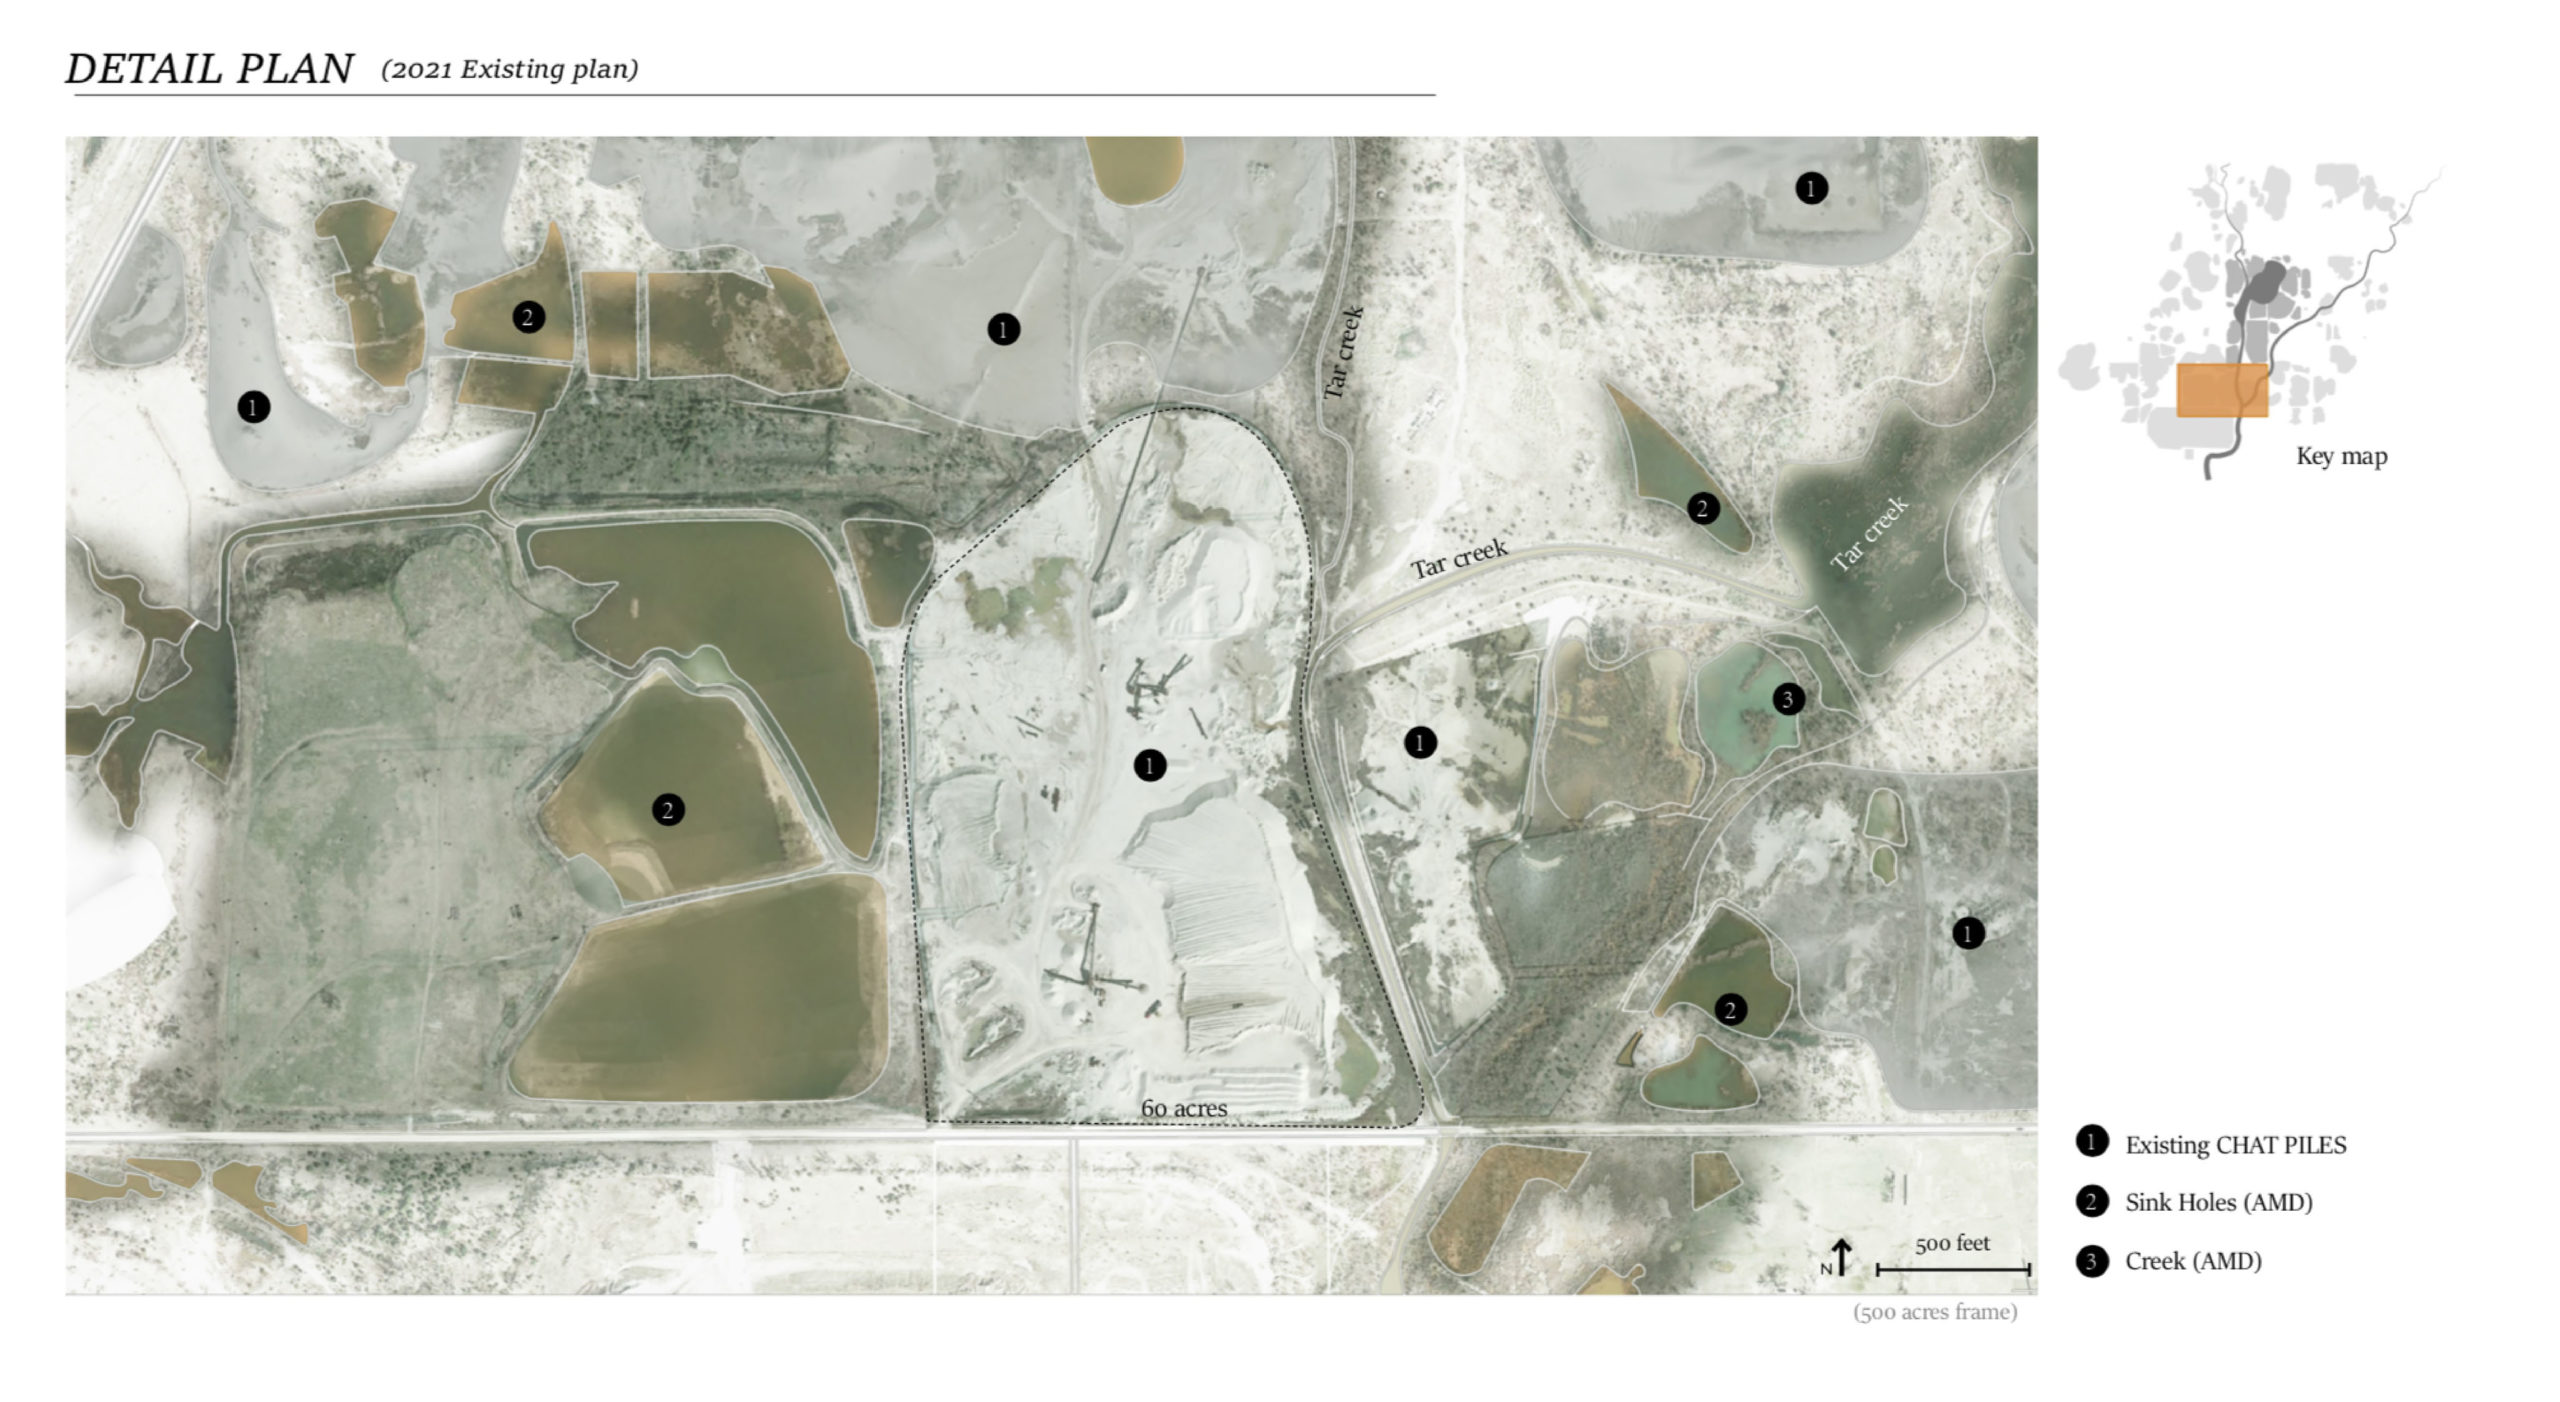 Site Plan of Tar Creek before proposal by Hao Holly Wang